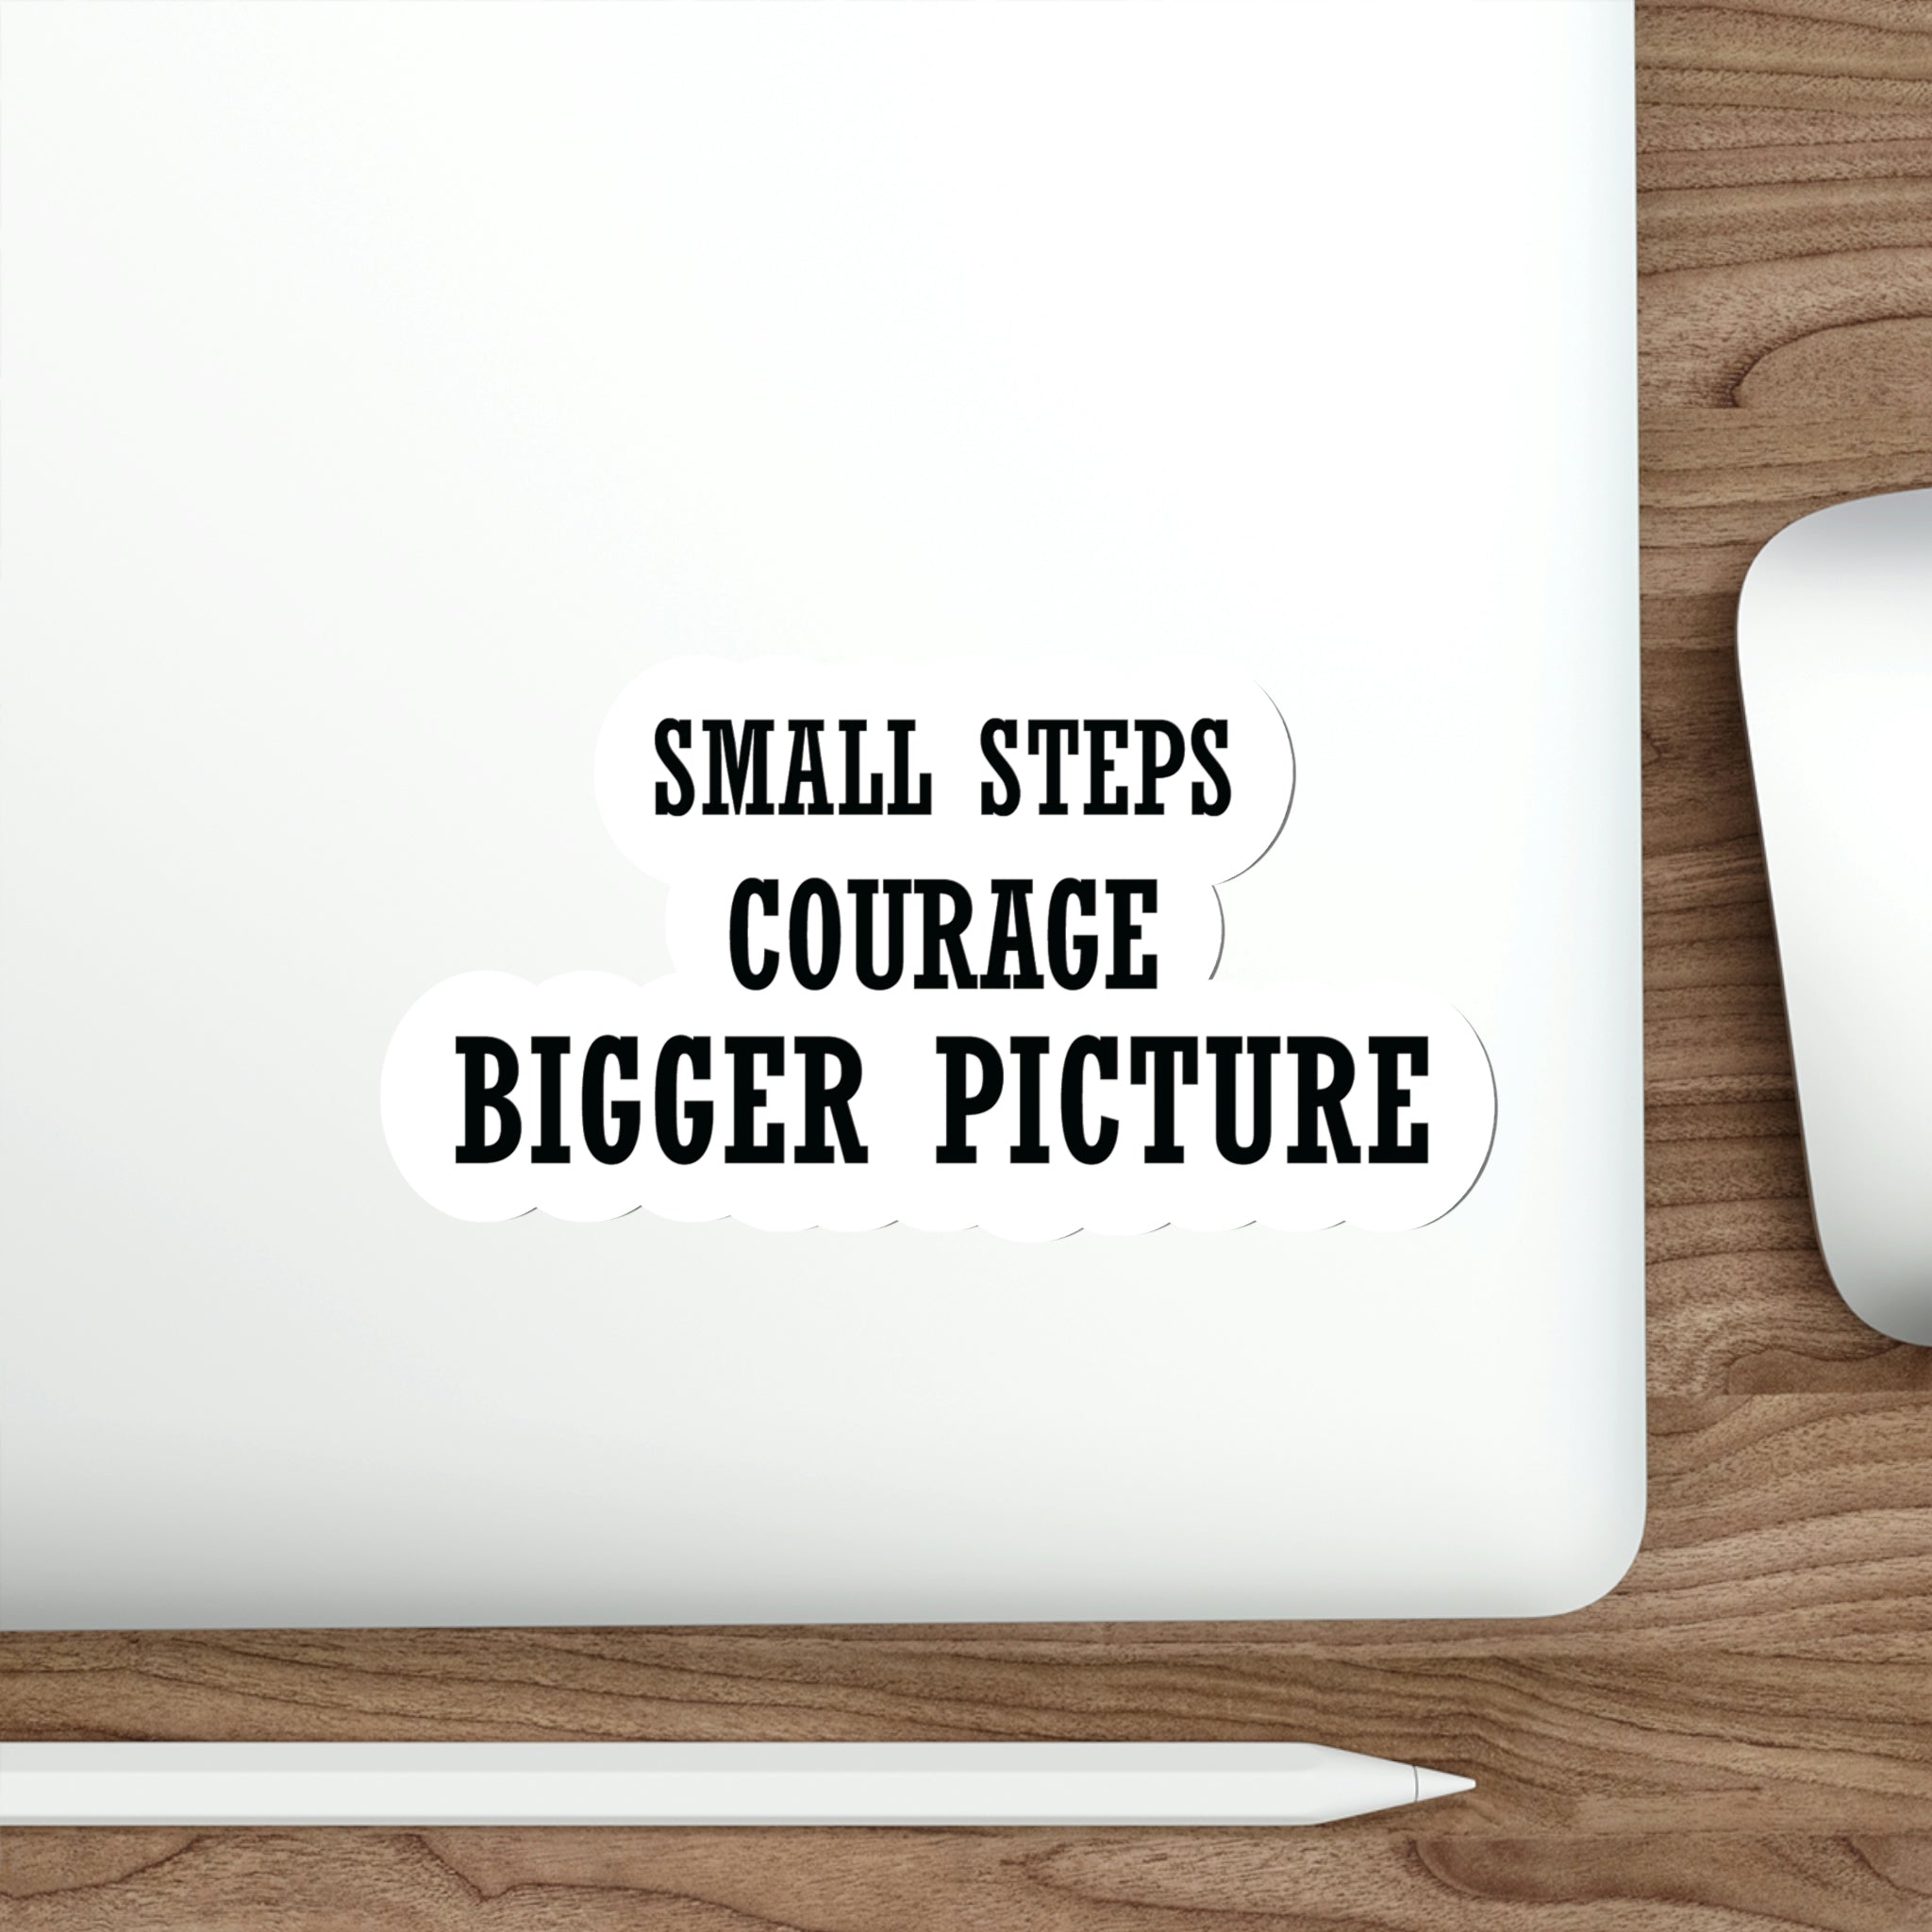 Small steps, courage, bigger picture - Shop Courage Sticker #size_6x6-inches